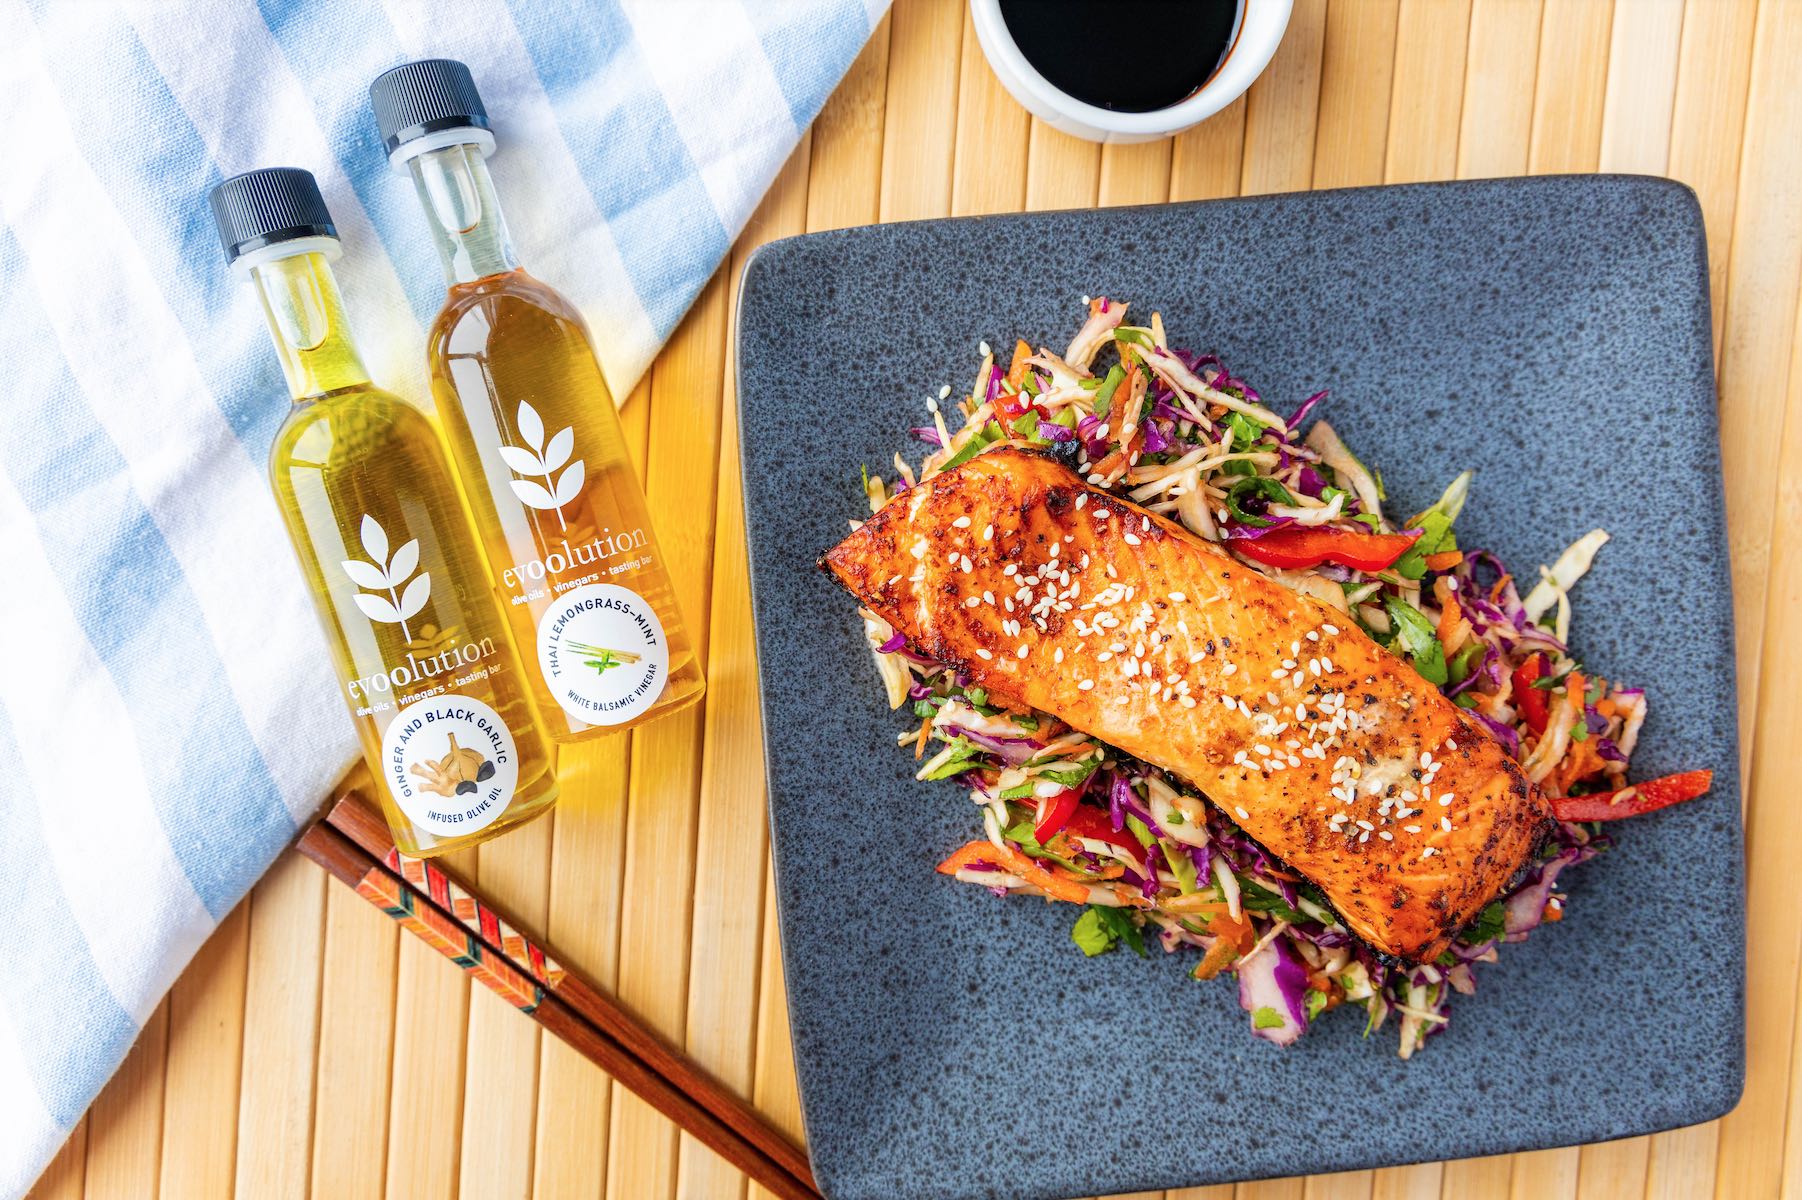 Image of Asian Salmon with Ginger & Black Garlic Olive Oil and Thai Lemongrass Mint Balsamic